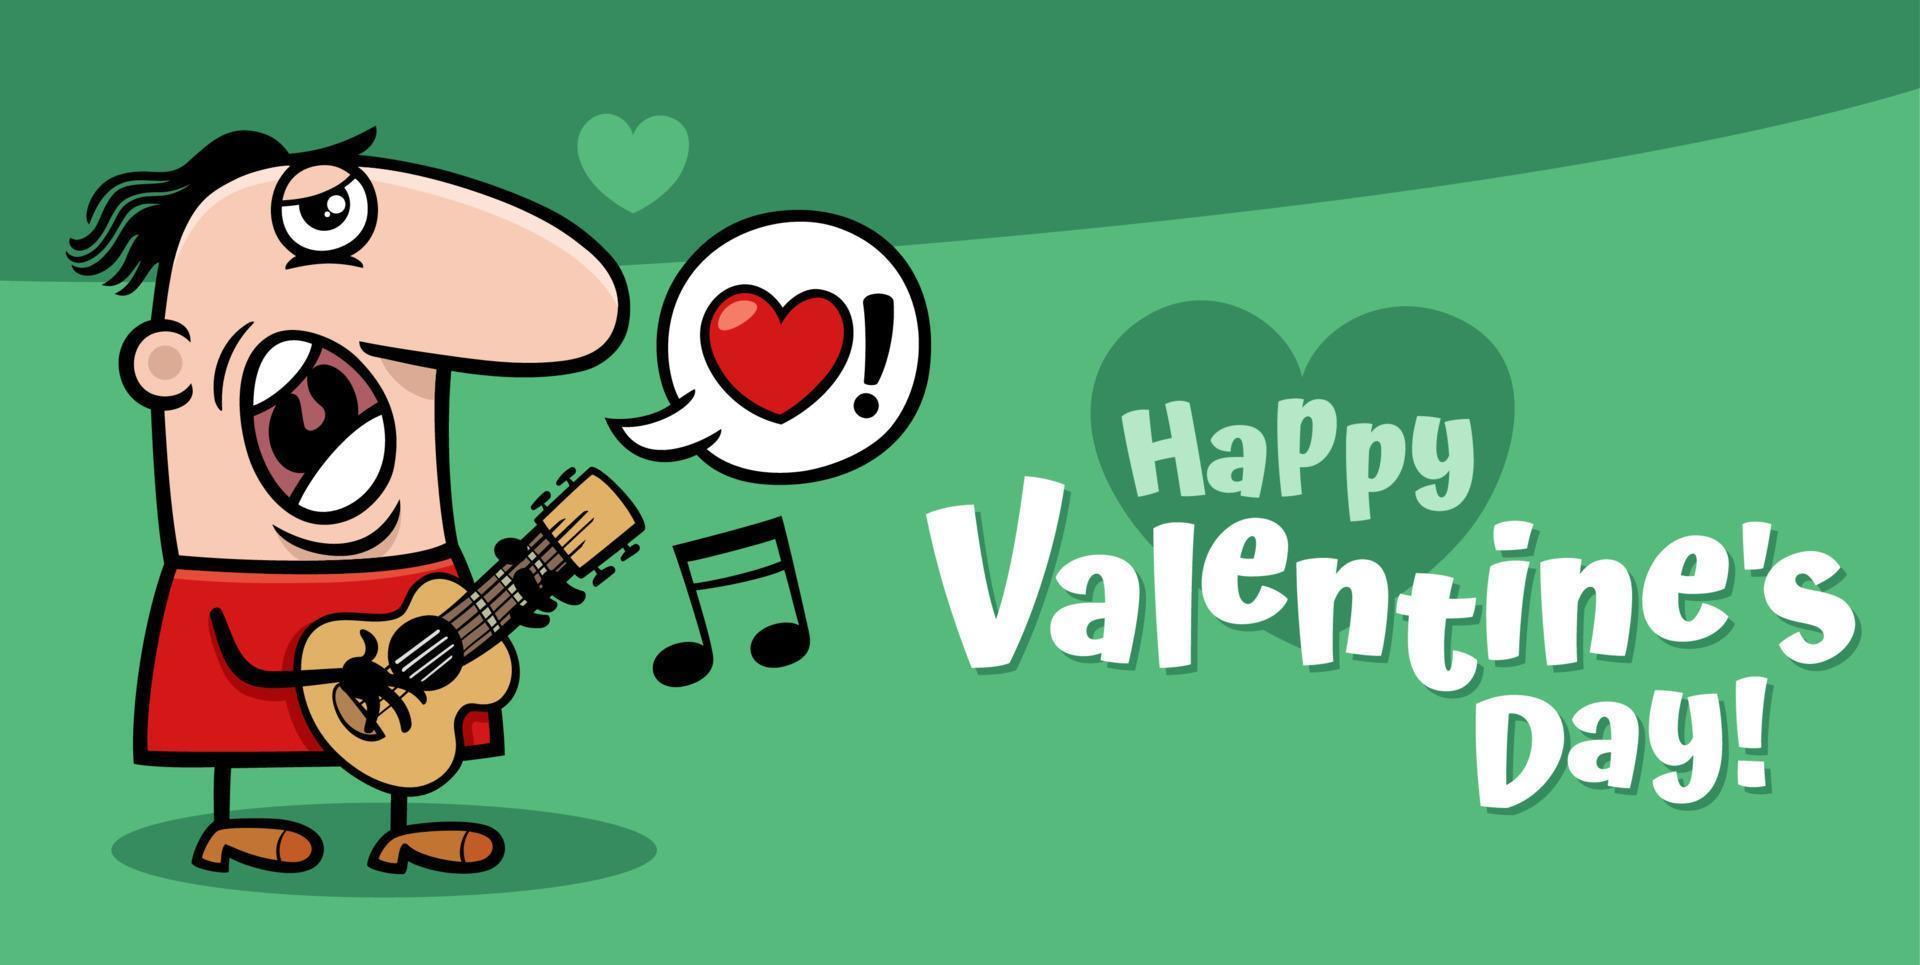 Valentines Day design with cartoon guy playing the guitar vector